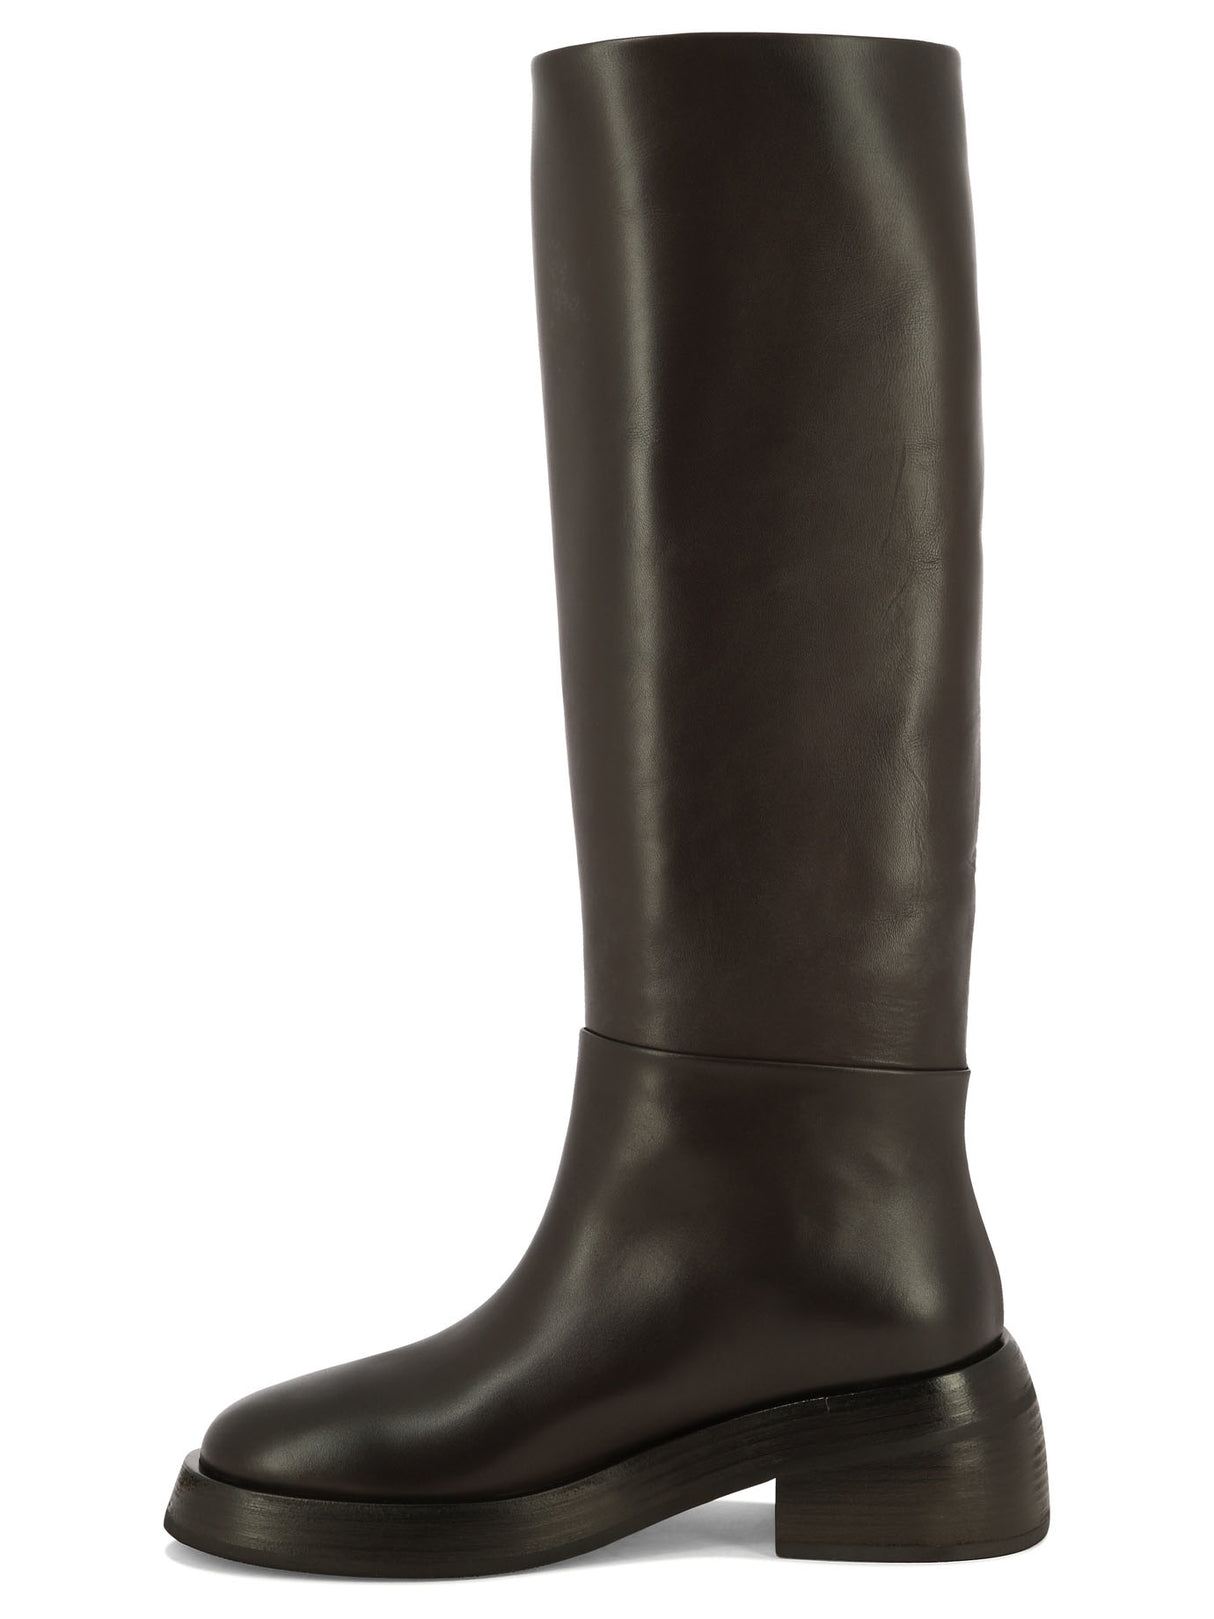 MARSELL Stylish Brown Pull-On Boots for Women - FW23 Collection